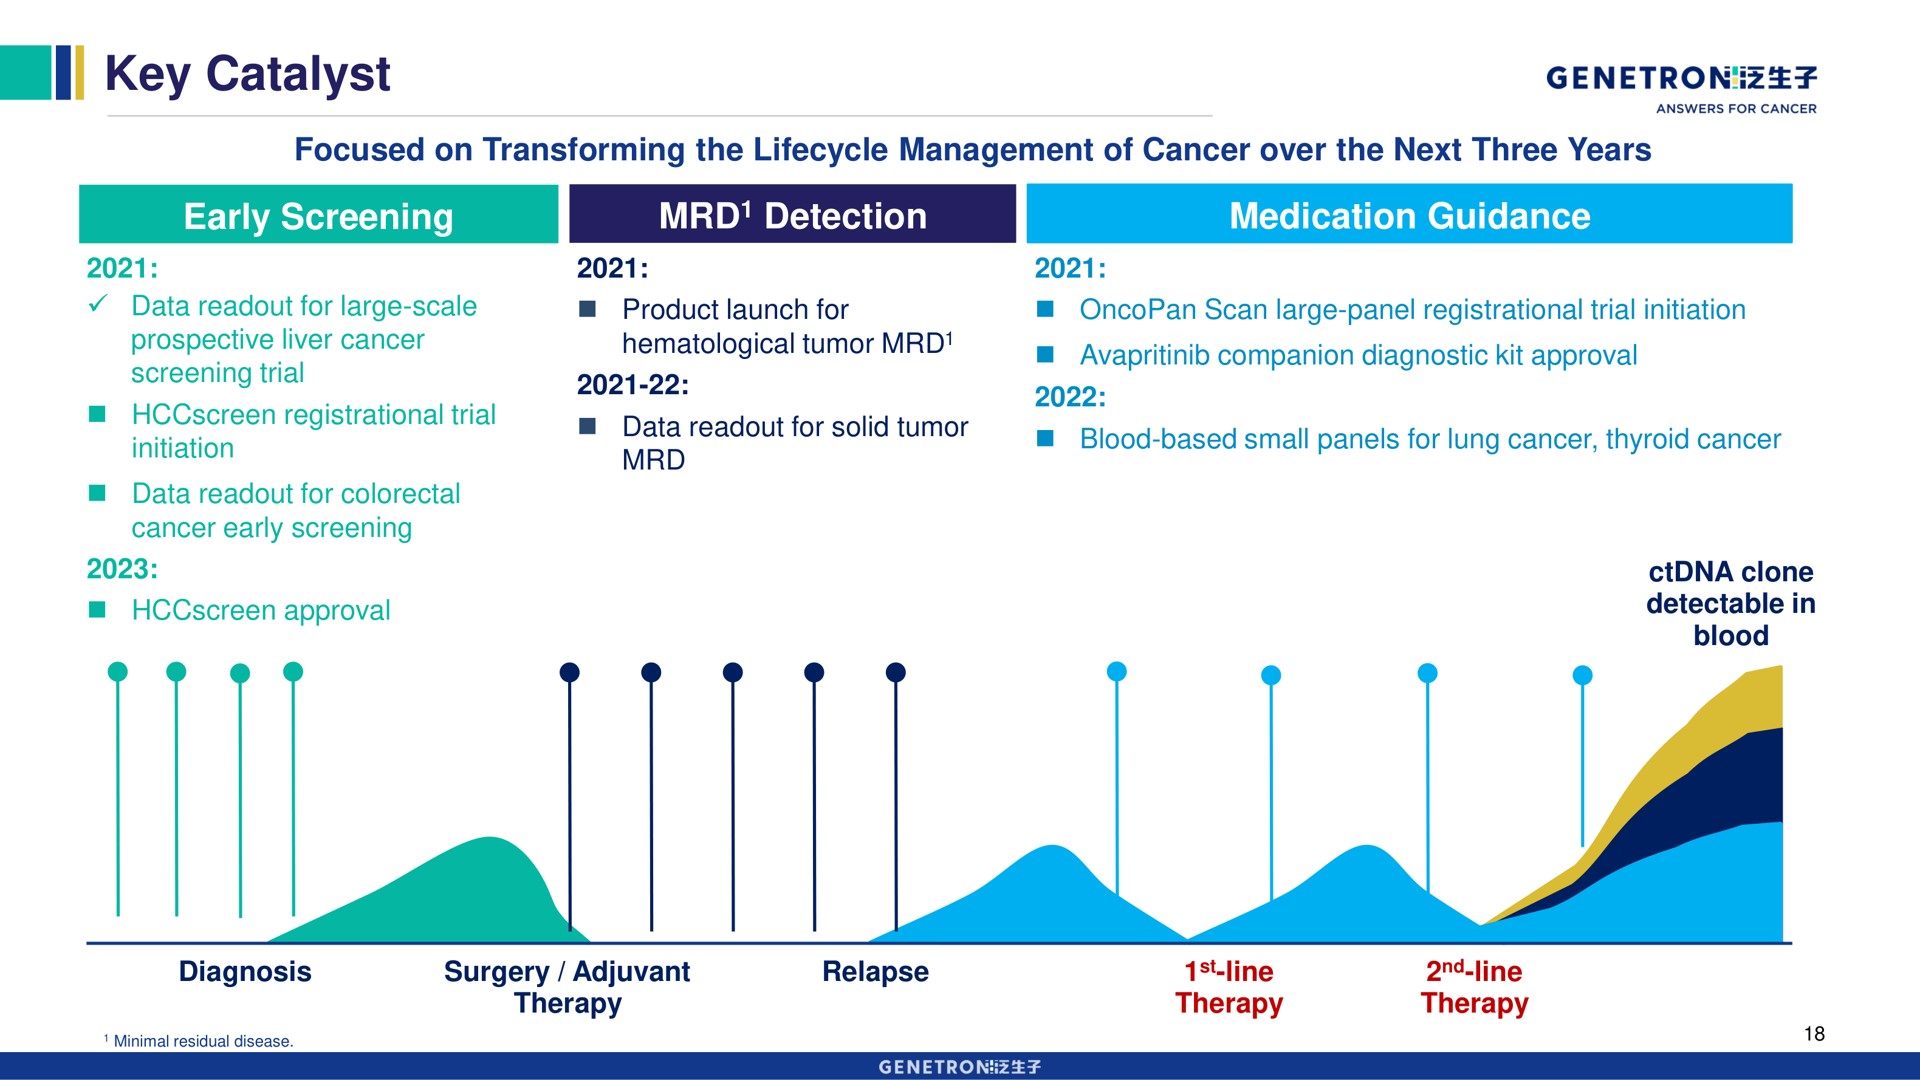 key catalyst early screening detection medication guidance | Genetron